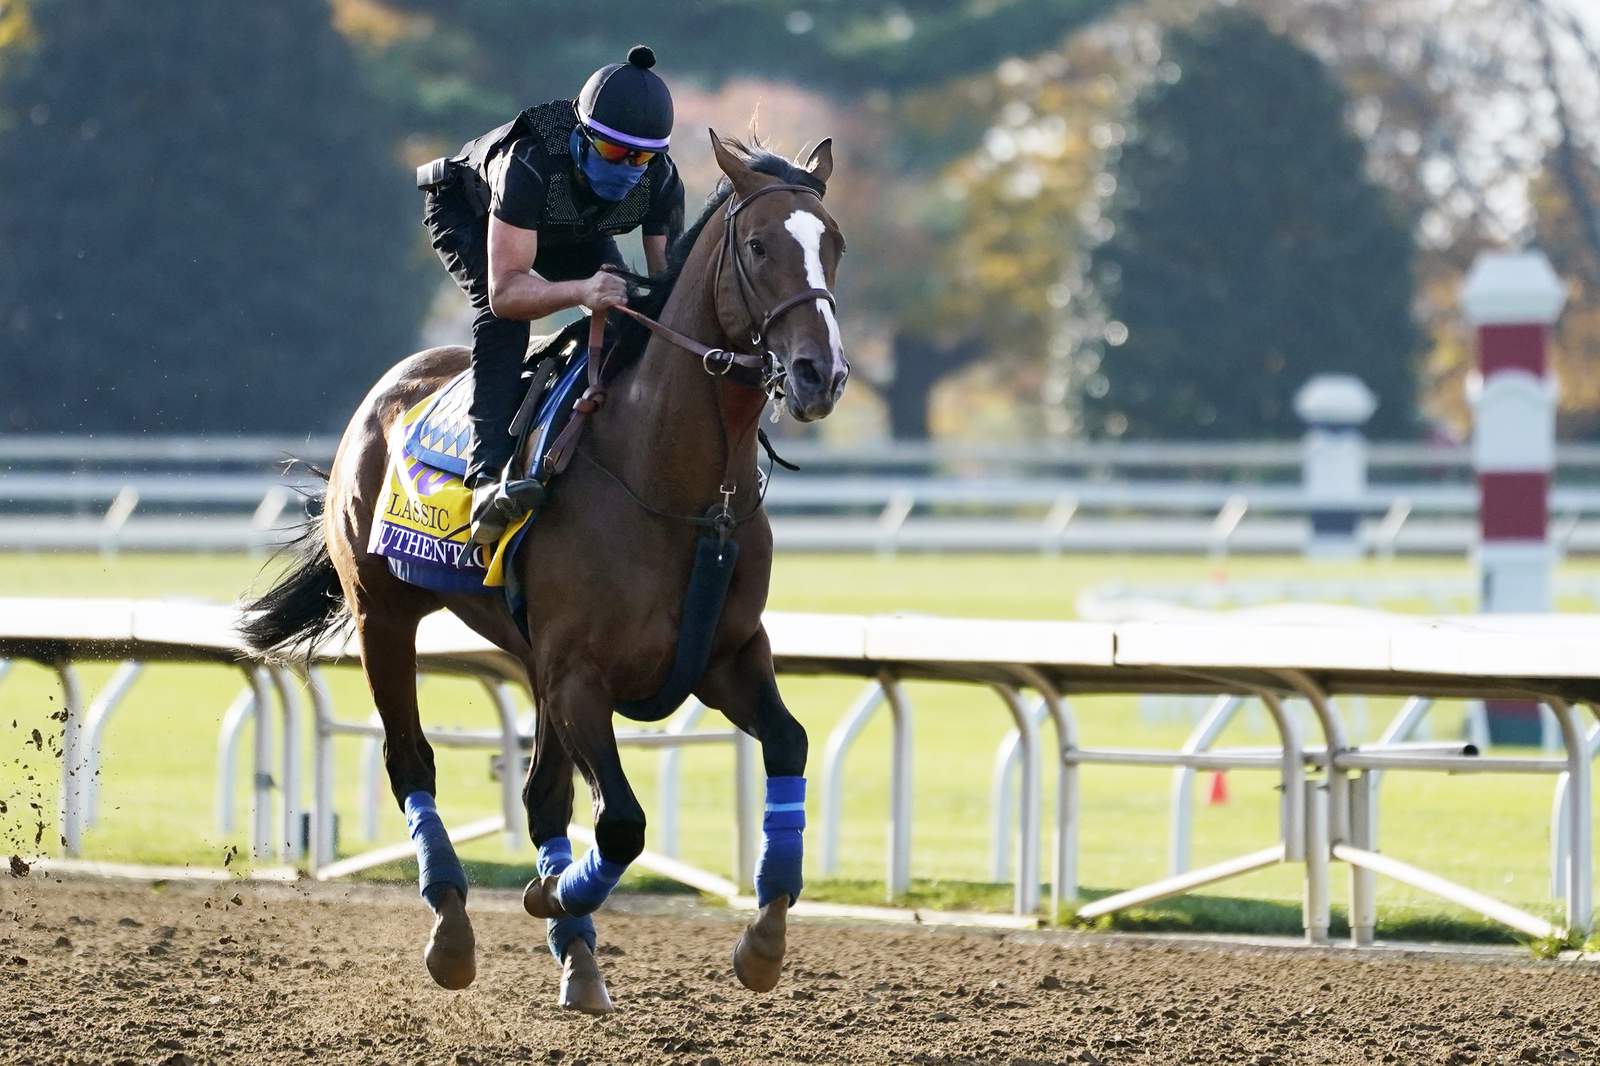 In an abnormal year, Breeders' Cup offers a bit of normalcy